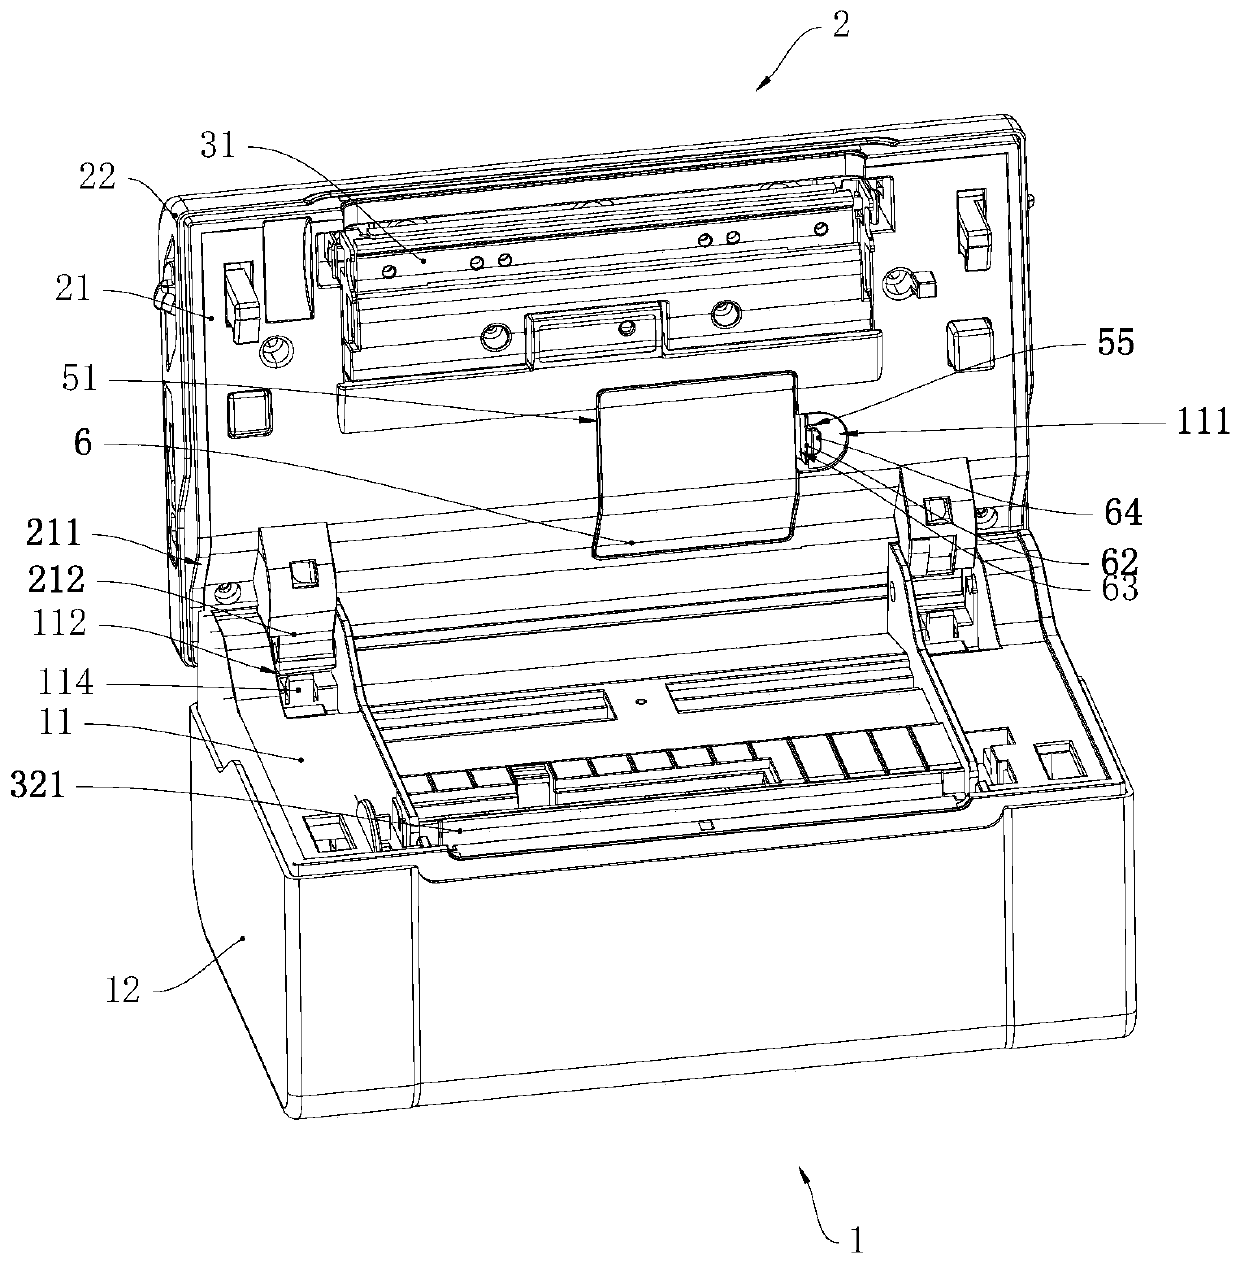 Thermal printer with open paper bin